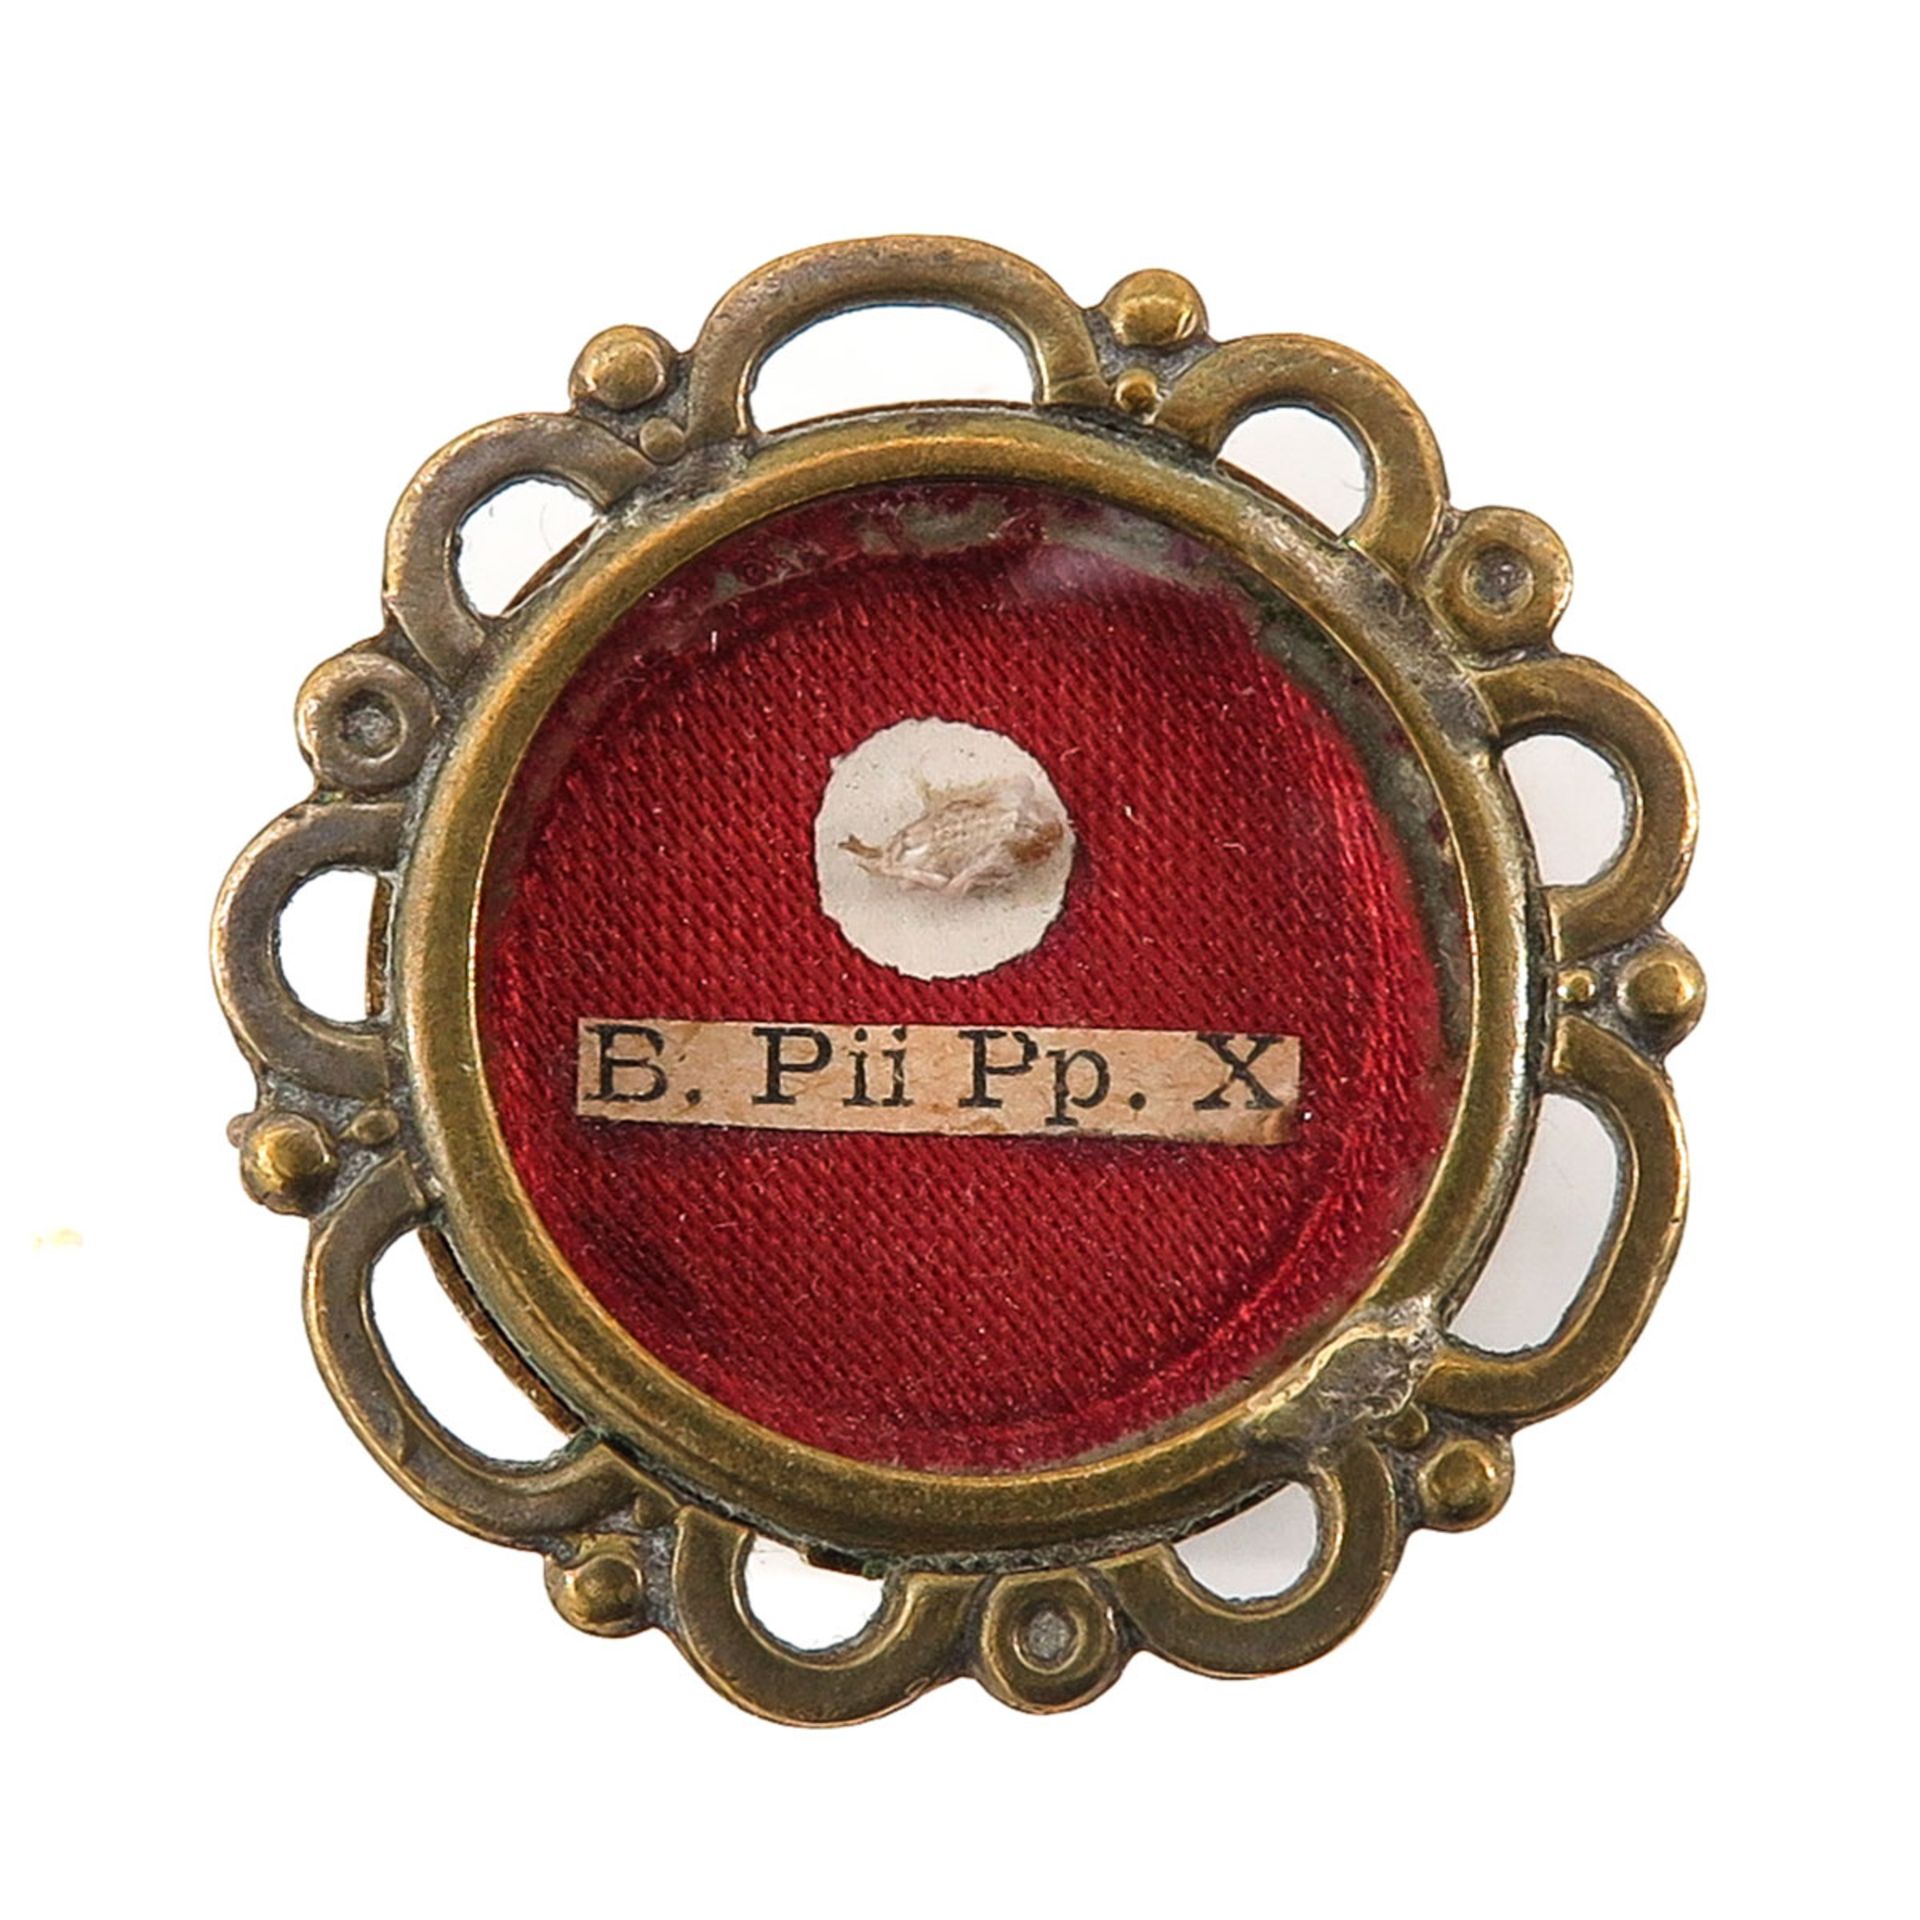 A Relic Holder Including Relic from Pope Pius X with Certificate